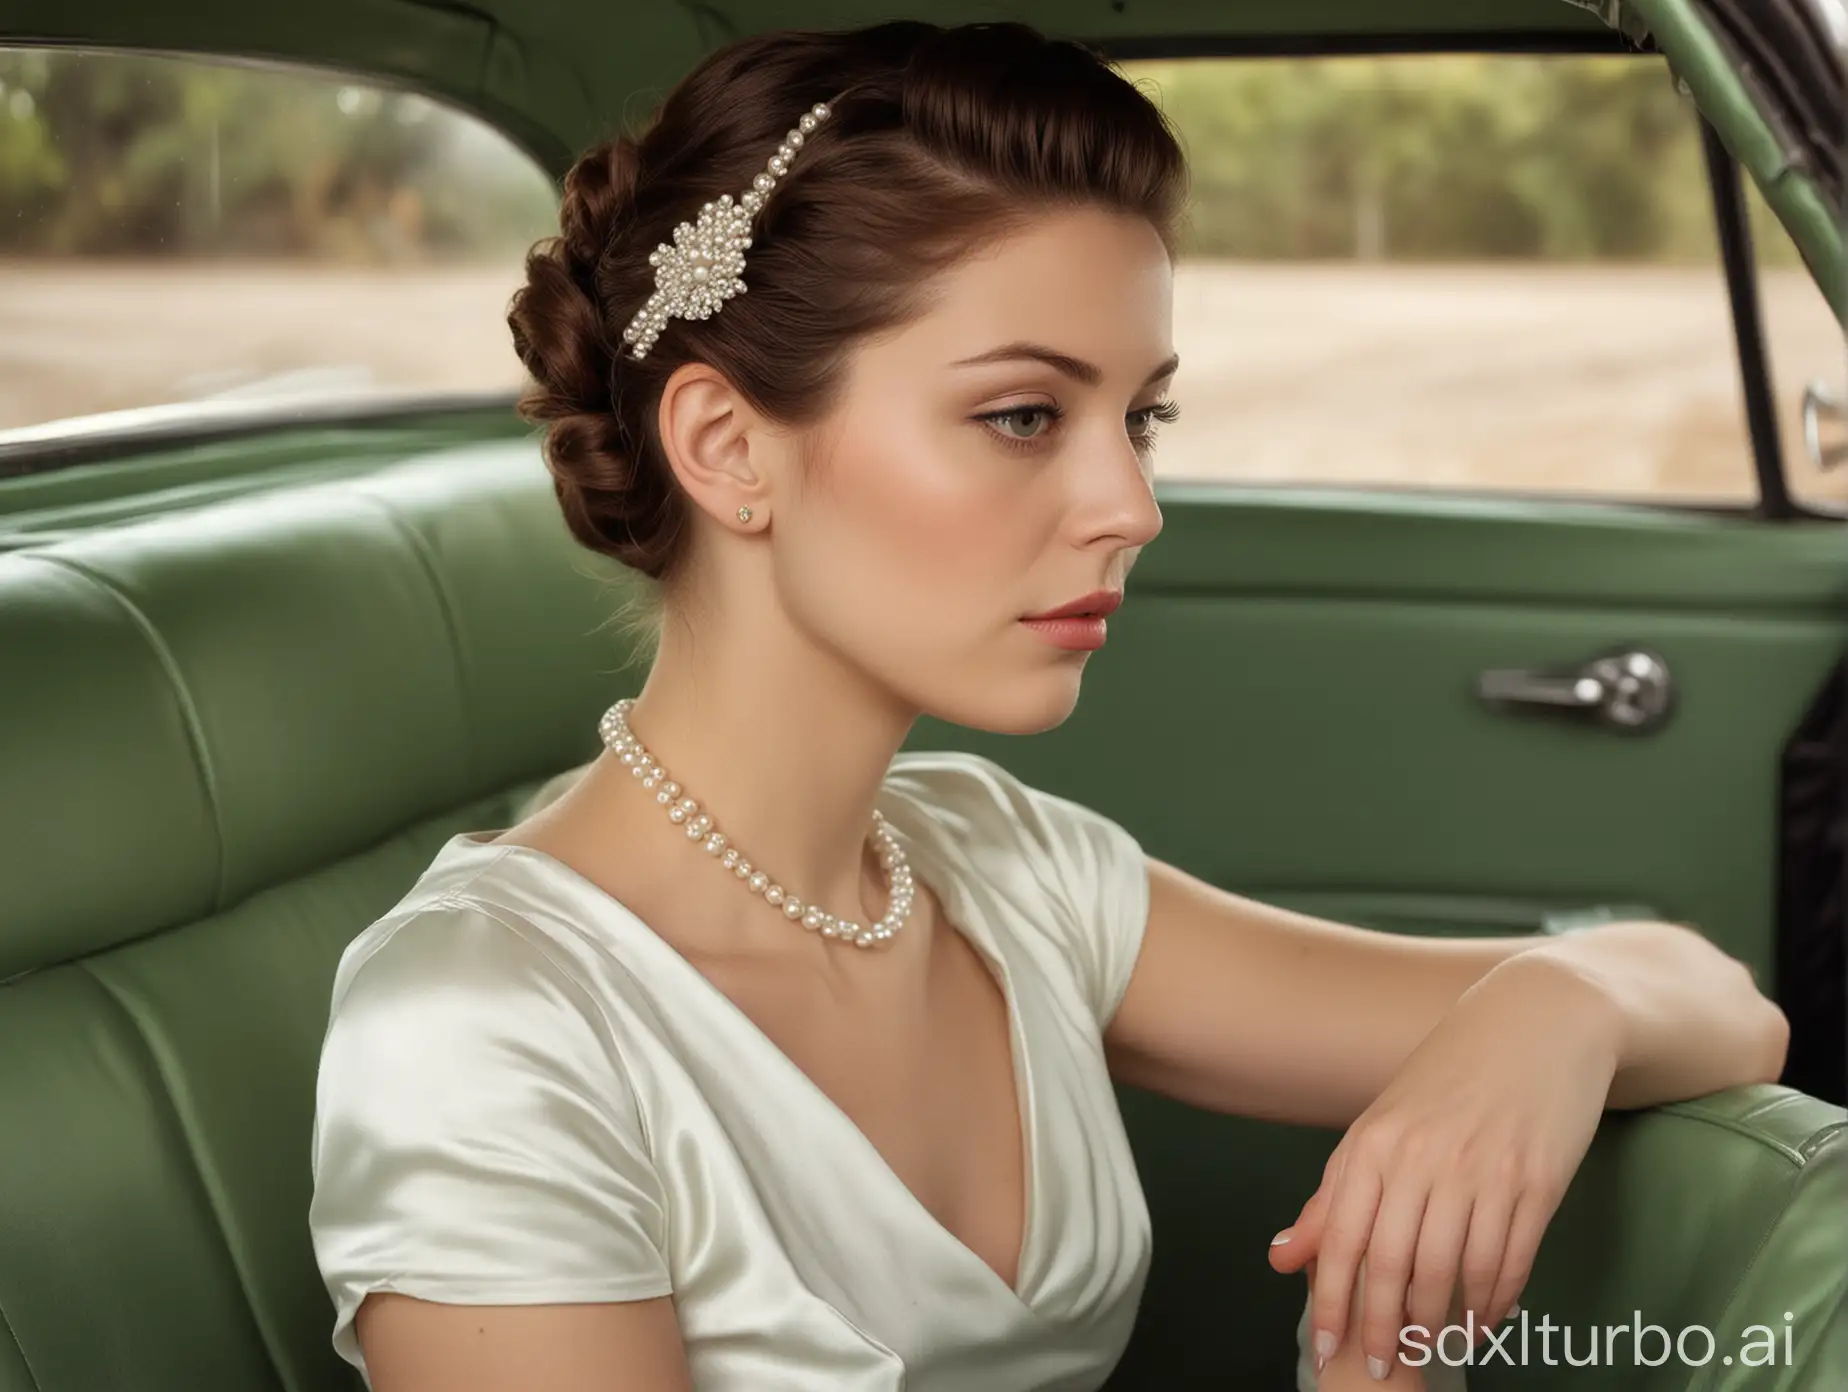 A captivating vintage-inspired image featuring a sophisticated woman seated in a charming green car. The woman, with an updo adorned by a pearl hair accessory, offers a profile view, displaying her serene and introspective expression. Her white satin or silk dress and multi-strand pearl necklace add a touch of classic elegance. The car's interior is pristine white, creating a striking contrast against the soft, warm lighting that enhances the colors and textures within the frame., photo